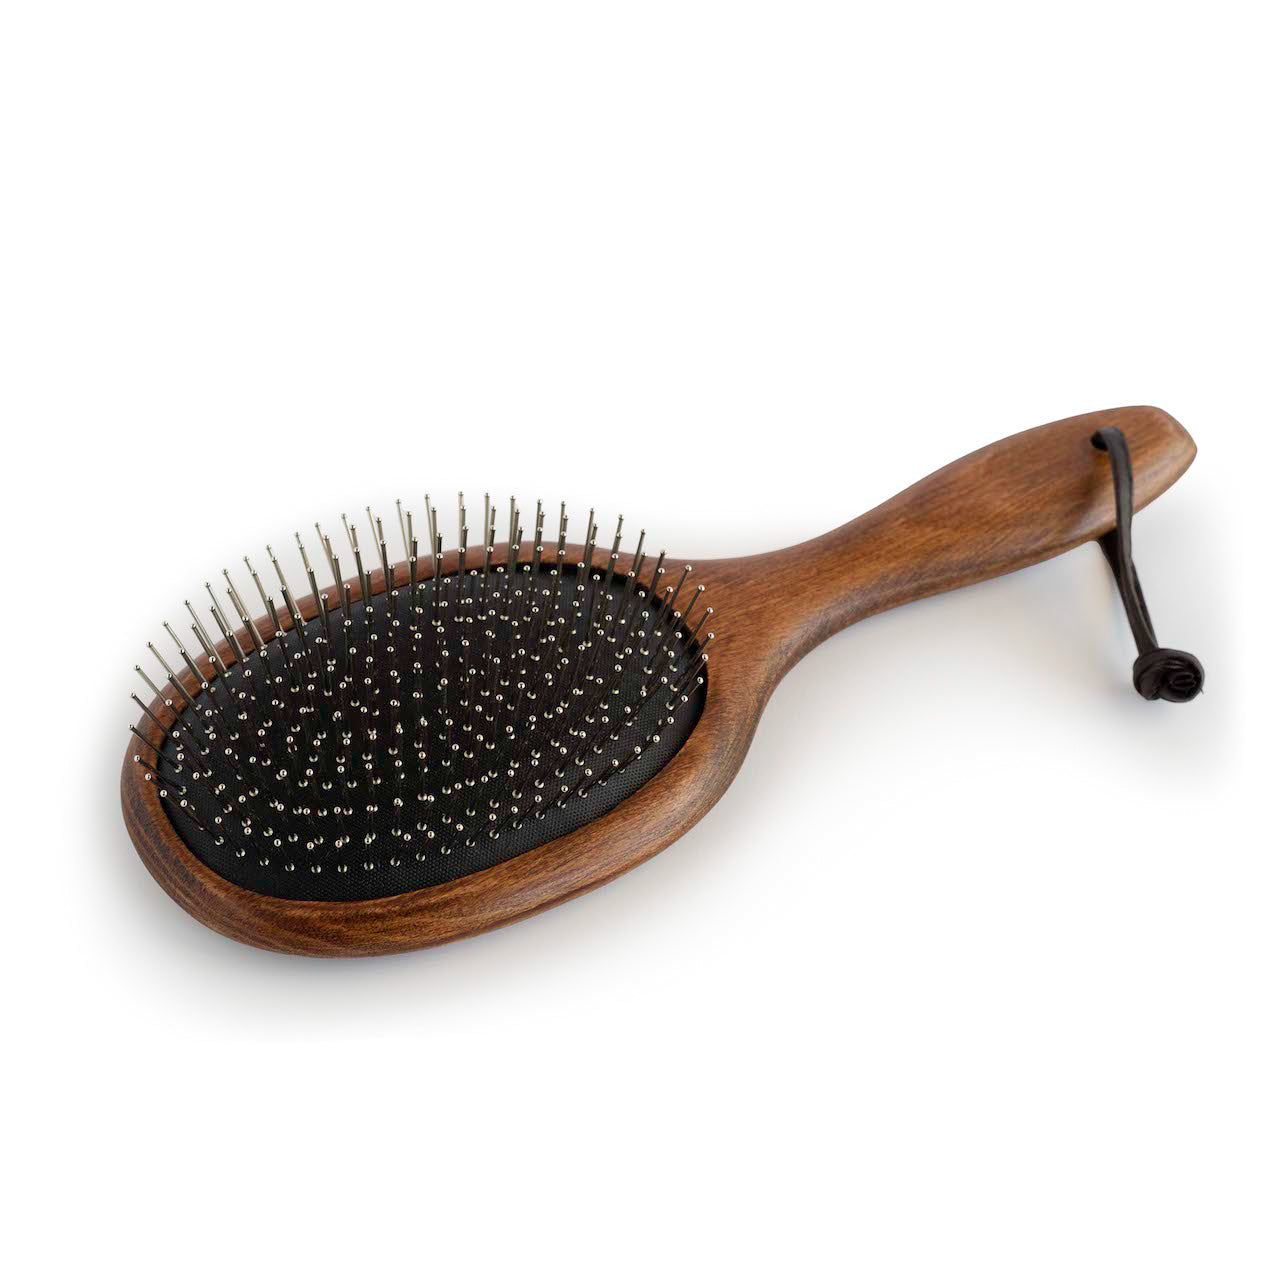 The Hairy Pony Mane and Tail Brush, with beechwood handle and a top view of the smooth metal bristles.